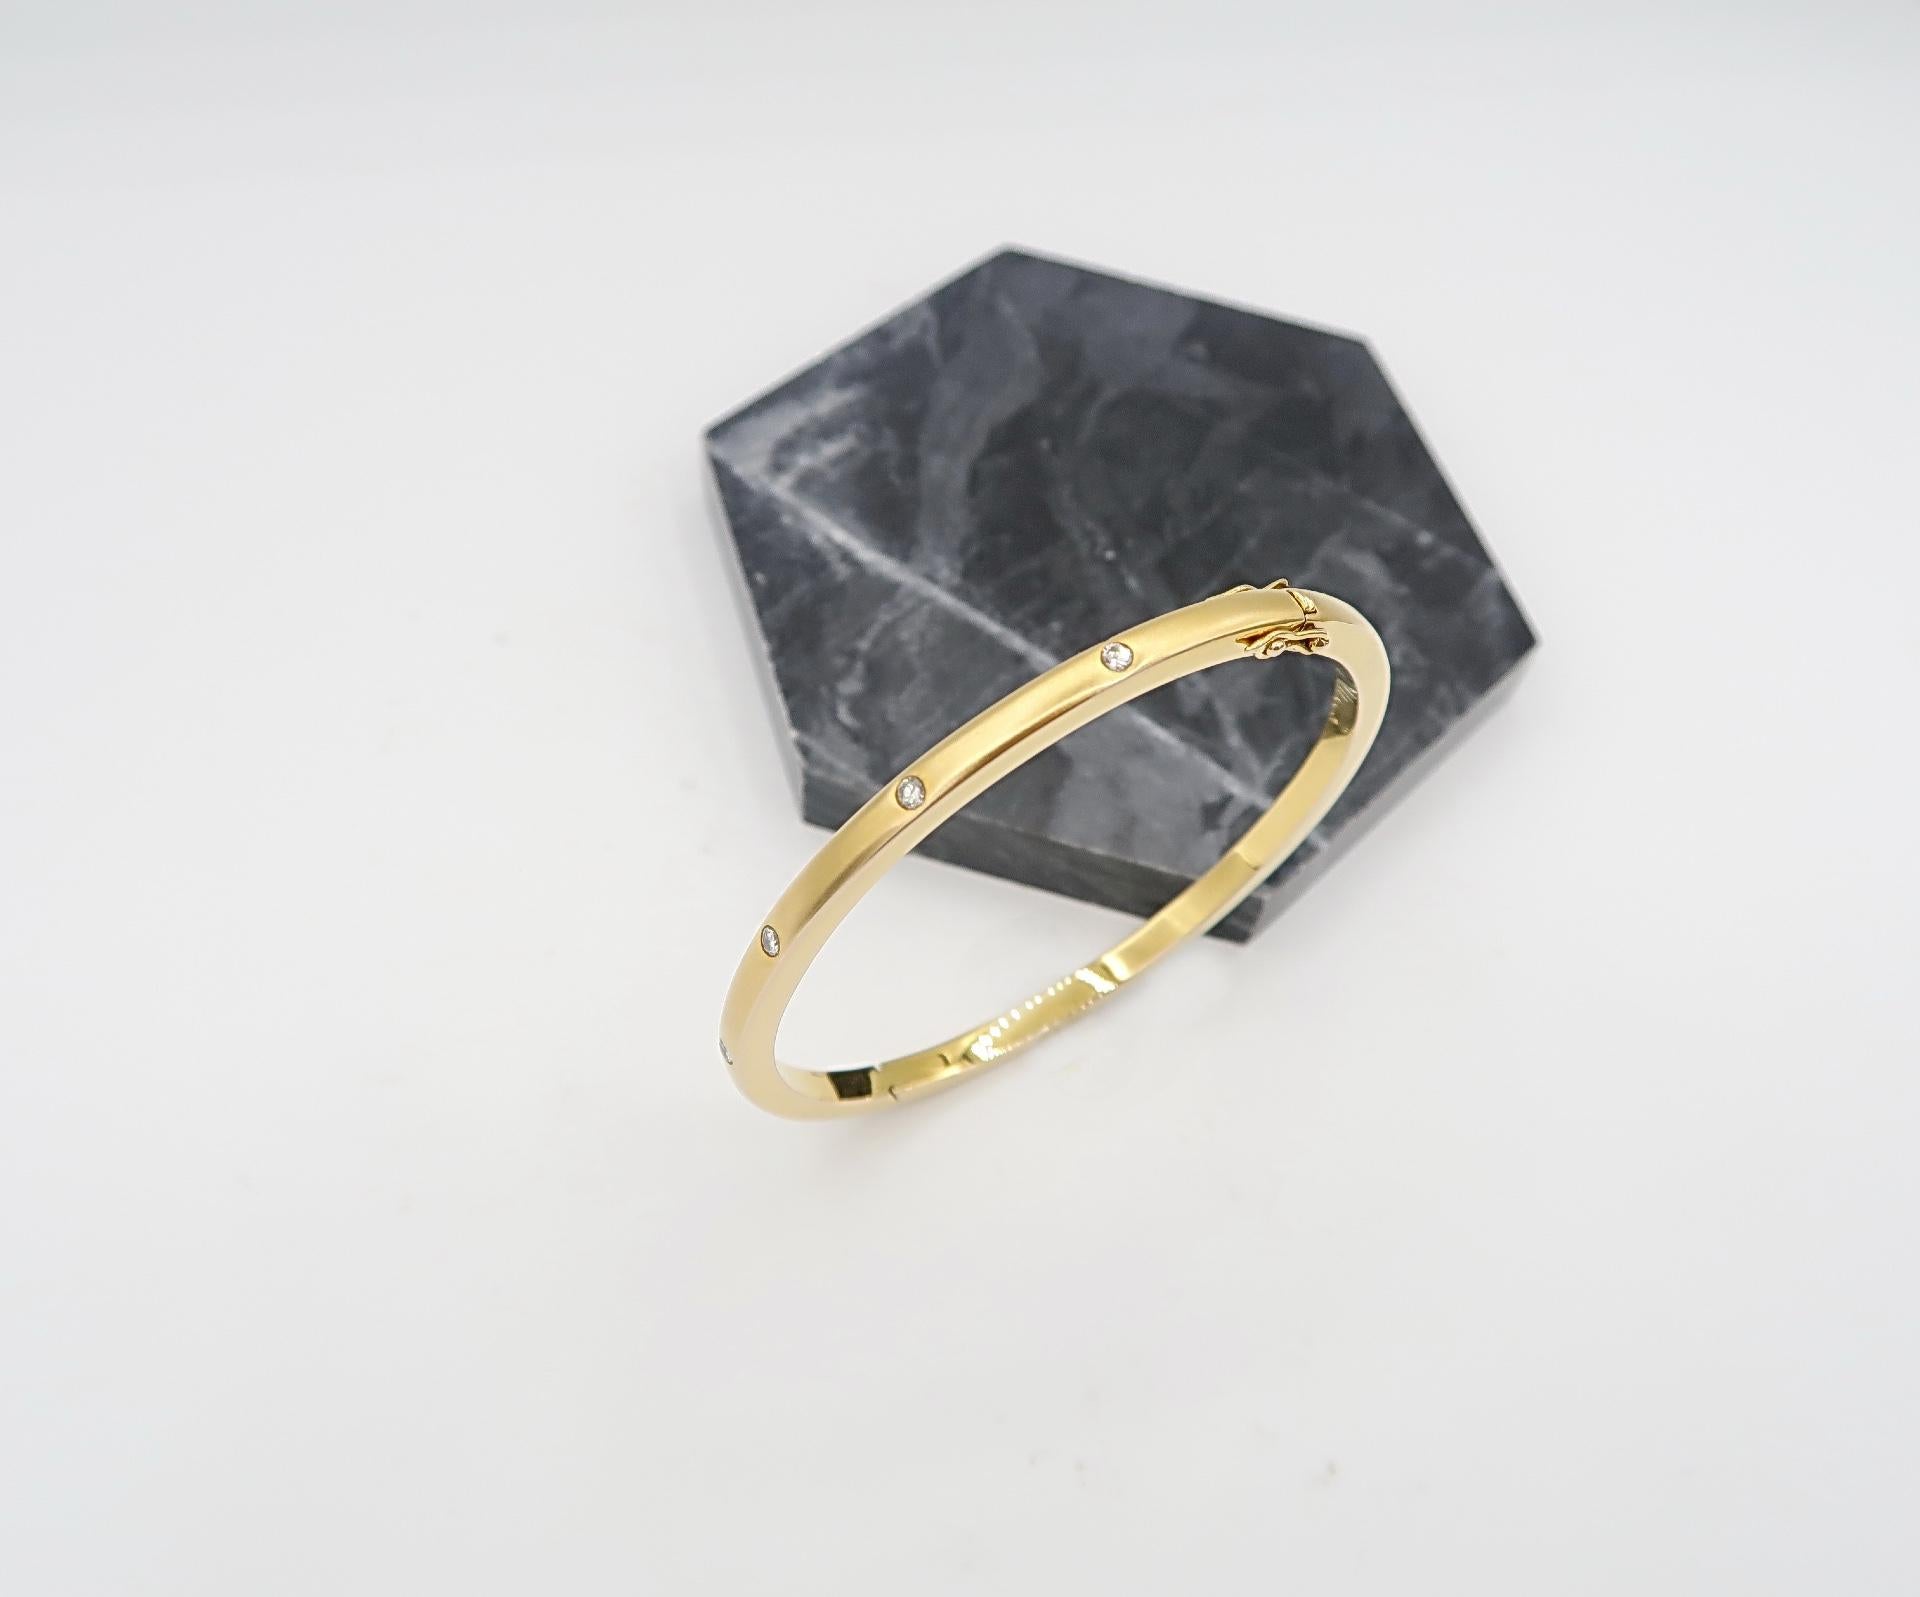 18cm Stackable Matte Skinny Bangle in 18K Yellow Gold with Diamonds Evenly Spaced on One Side

Gold: 18K Yellow Gold, 21.66 g
Diamond: 0.30 ct

Inner circumference: 18 cm
Band width: 4 mm